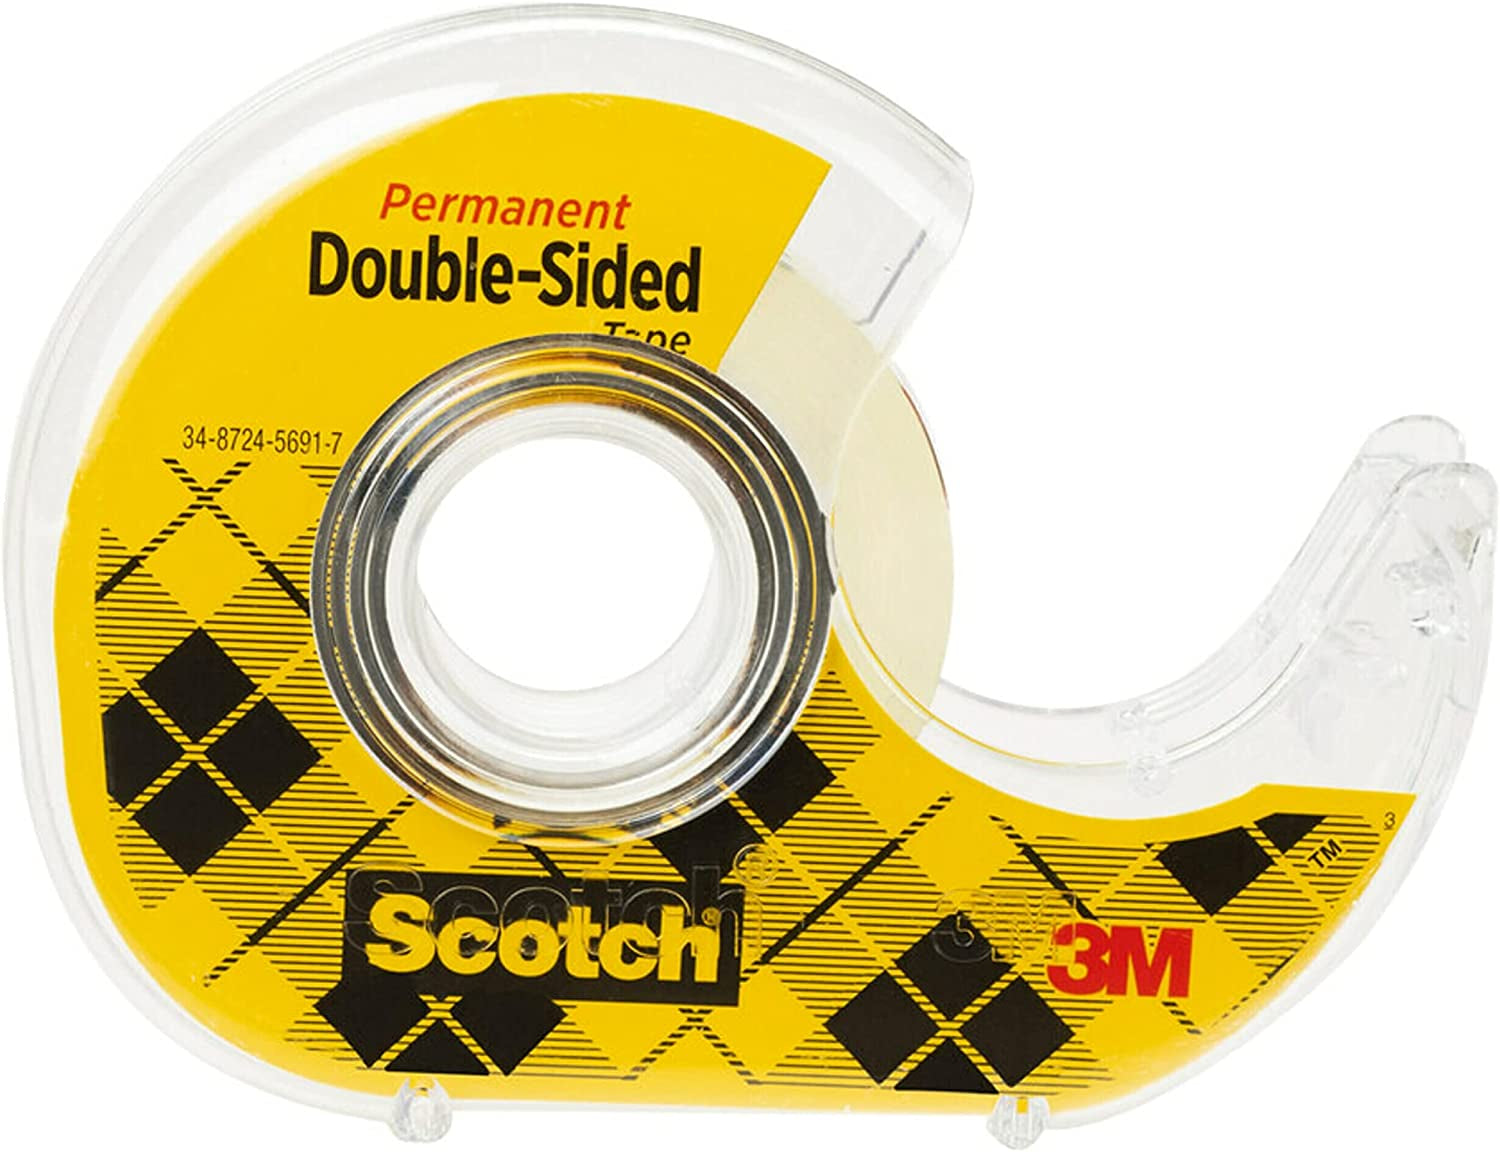 Scotch Double Sided Tape, 1/2 in X 500 In, 6 Dispensered Rolls (6137H-2PC-MP)